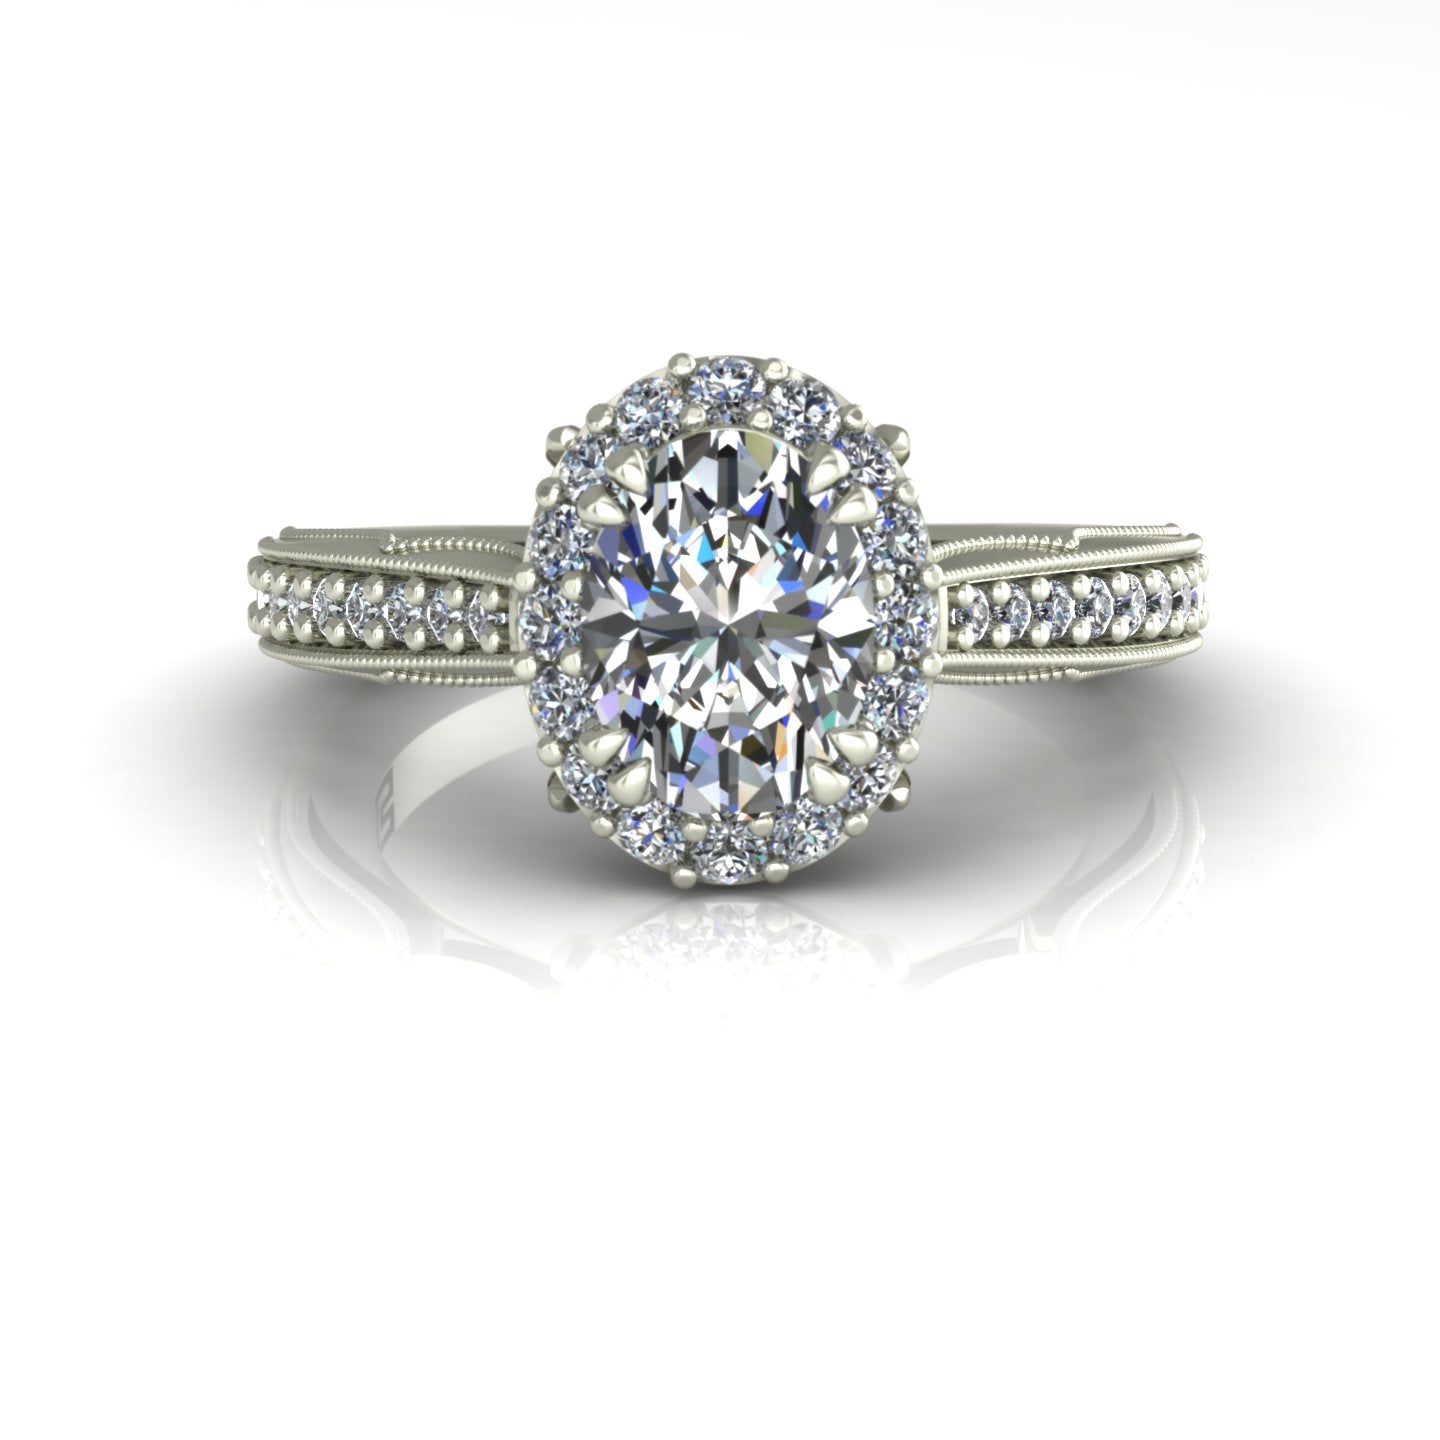 one carat oval diamond halo engagement ring in 14k white gold - Charles Babb Designs - top view